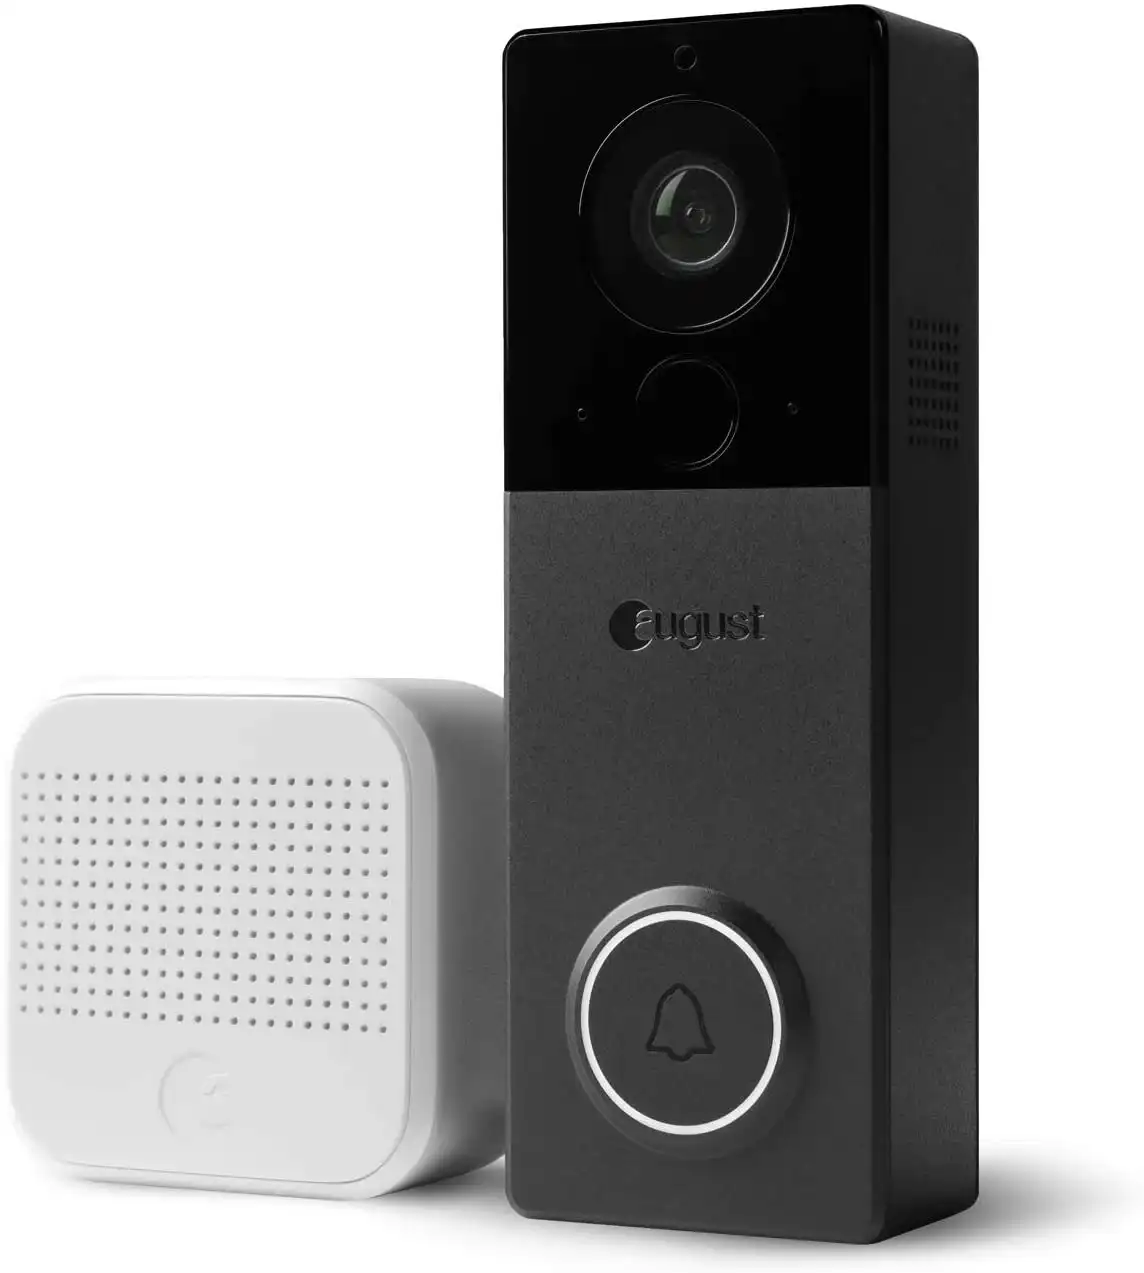 August View Wire-Free Doorbell Camera, Black, AUG-AB03-C04-001